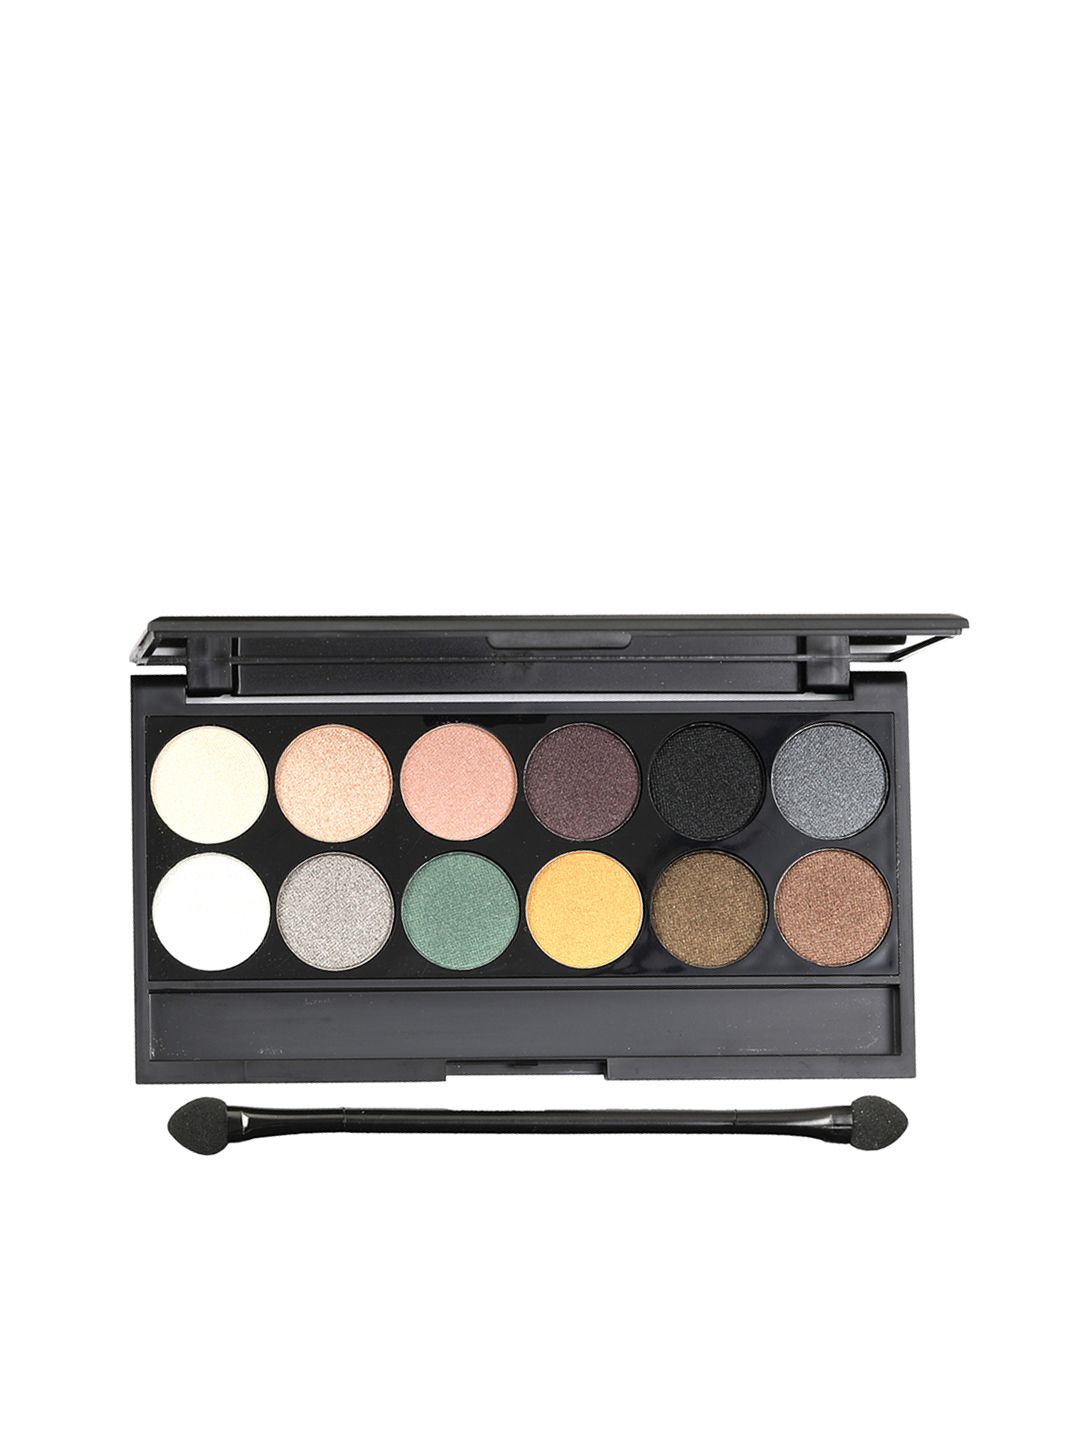 SWISS BEAUTY 12 Color Ultra Professional Eyeshadow Palette - 02 Price in India